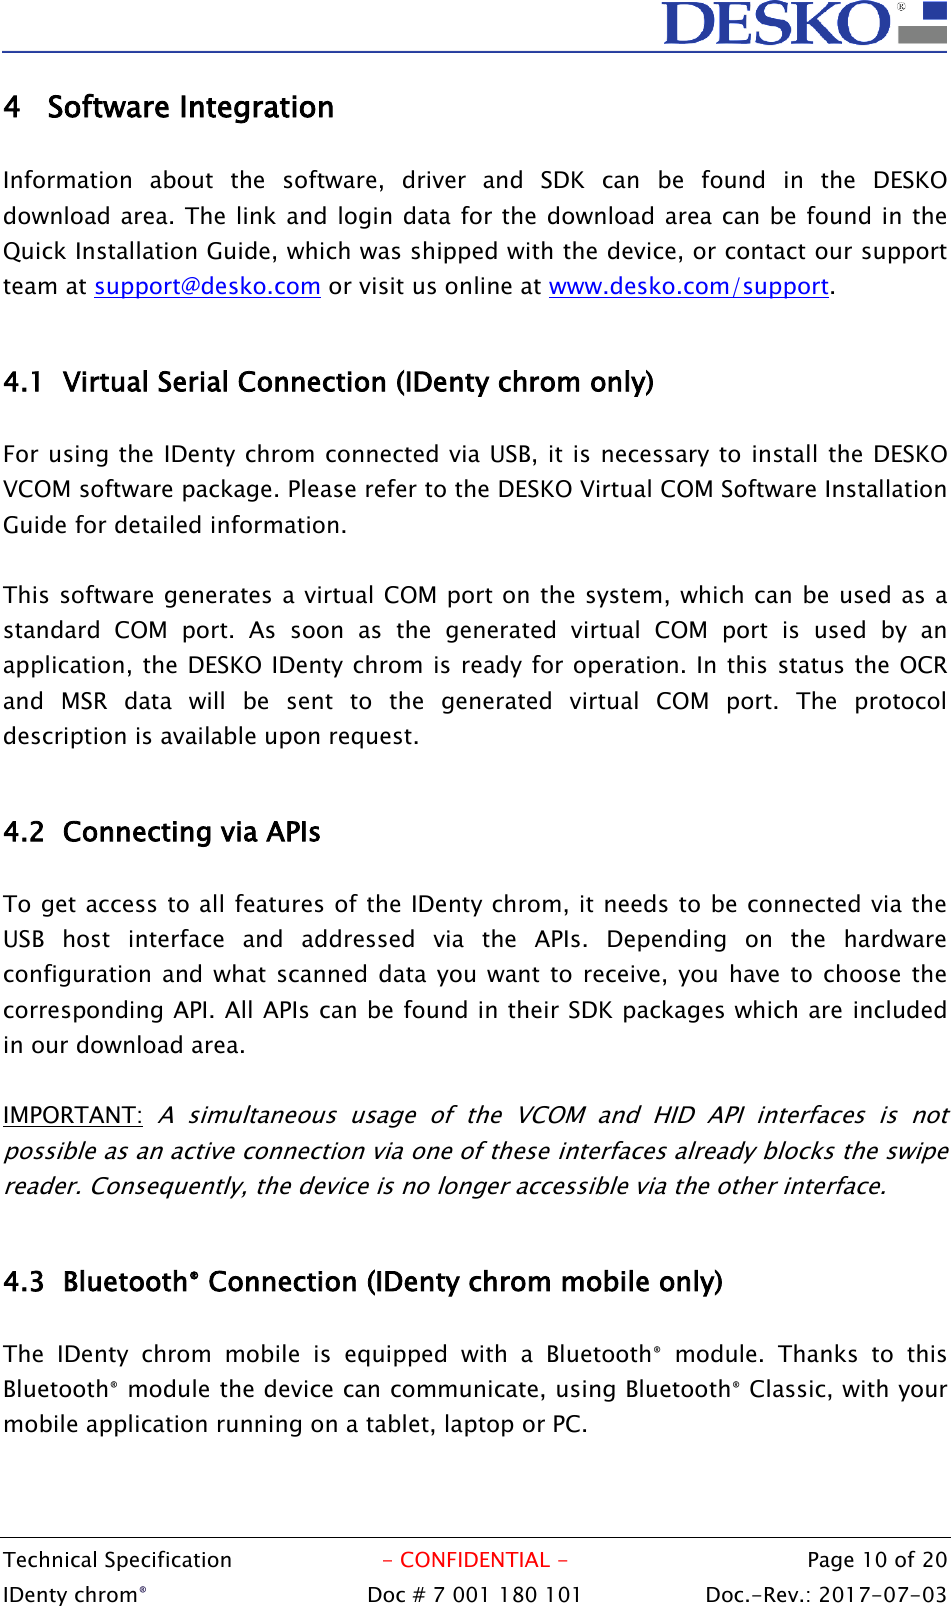  Technical Specification  - CONFIDENTIAL -  Page 10 of 20 IDenty chrom®  Doc # 7 001 180 101   Doc.-Rev.: 2017-07-03   4 Software Integration  Information  about  the  software,  driver  and  SDK  can  be  found  in  the  DESKO download area. The link and login data for the download area can be found in the Quick Installation Guide, which was shipped with the device, or contact our support team at support@desko.com or visit us online at www.desko.com/support.   4.1 Virtual Serial Connection (IDenty chrom only)  For using the IDenty chrom connected via USB, it is necessary to install the DESKO VCOM software package. Please refer to the DESKO Virtual COM Software Installation Guide for detailed information.  This software generates a virtual COM port on the system, which can be used as a standard  COM  port.  As  soon  as  the  generated  virtual  COM  port  is  used  by  an application, the DESKO IDenty chrom is ready for operation. In this status the OCR and  MSR  data  will  be  sent  to  the  generated  virtual  COM  port.  The  protocol description is available upon request.  4.2 Connecting via APIs  To get access to all features of the IDenty chrom, it needs to be connected via the USB  host  interface  and  addressed  via  the  APIs.  Depending  on  the  hardware configuration and what scanned  data you want to receive, you have  to  choose the corresponding API. All APIs can be found in their SDK packages which are included in our download area.  IMPORTANT: A  simultaneous  usage  of  the  VCOM  and  HID  API  interfaces  is  not possible as an active connection via one of these interfaces already blocks the swipe reader. Consequently, the device is no longer accessible via the other interface.  4.3 Bluetooth® Connection (IDenty chrom mobile only)  The  IDenty  chrom  mobile  is  equipped  with  a  Bluetooth®  module.  Thanks  to  this Bluetooth® module the device can communicate, using Bluetooth® Classic, with your mobile application running on a tablet, laptop or PC.   